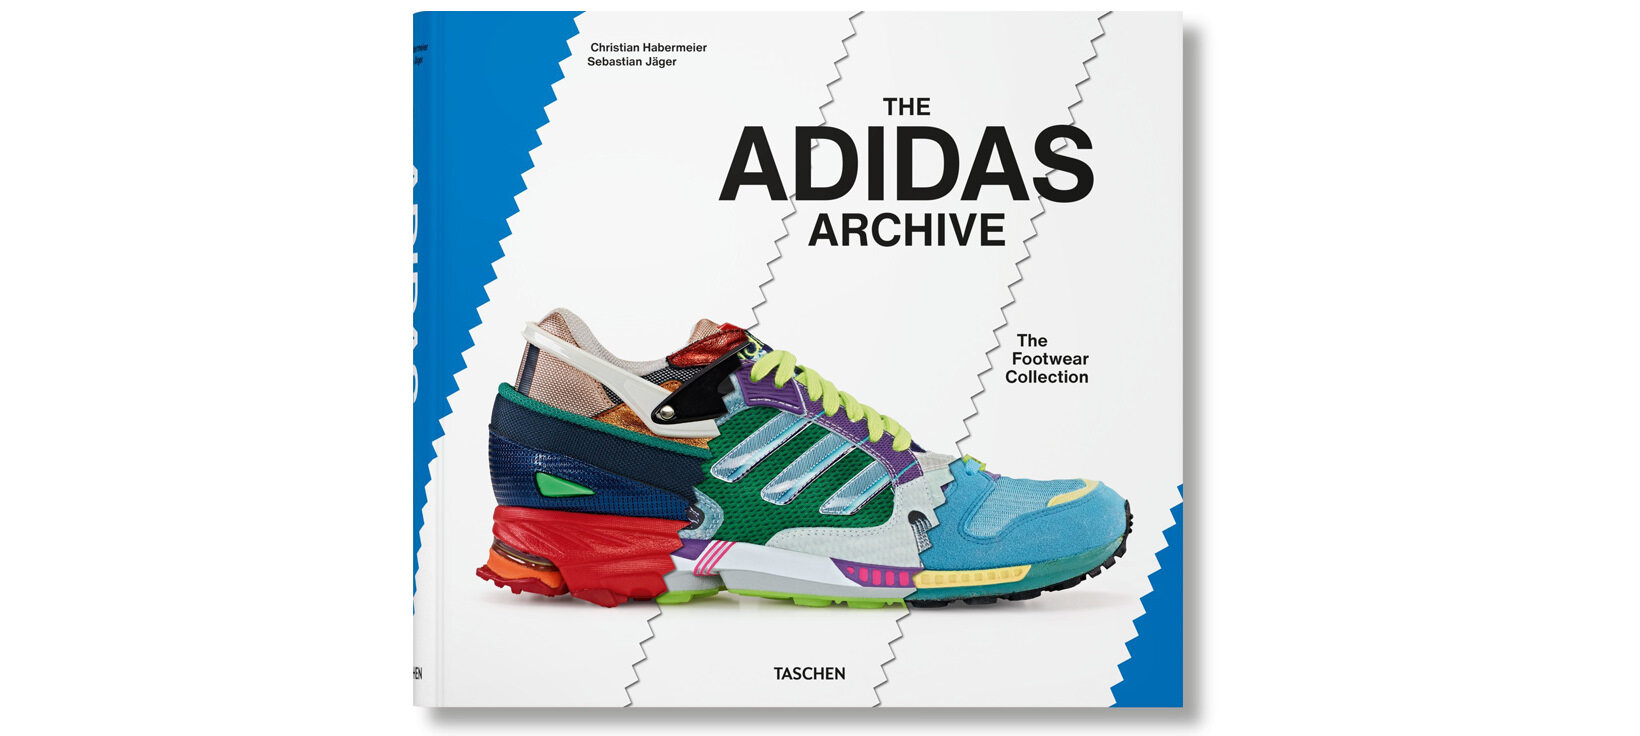 xl-adidas_archive-image_cover.jpg